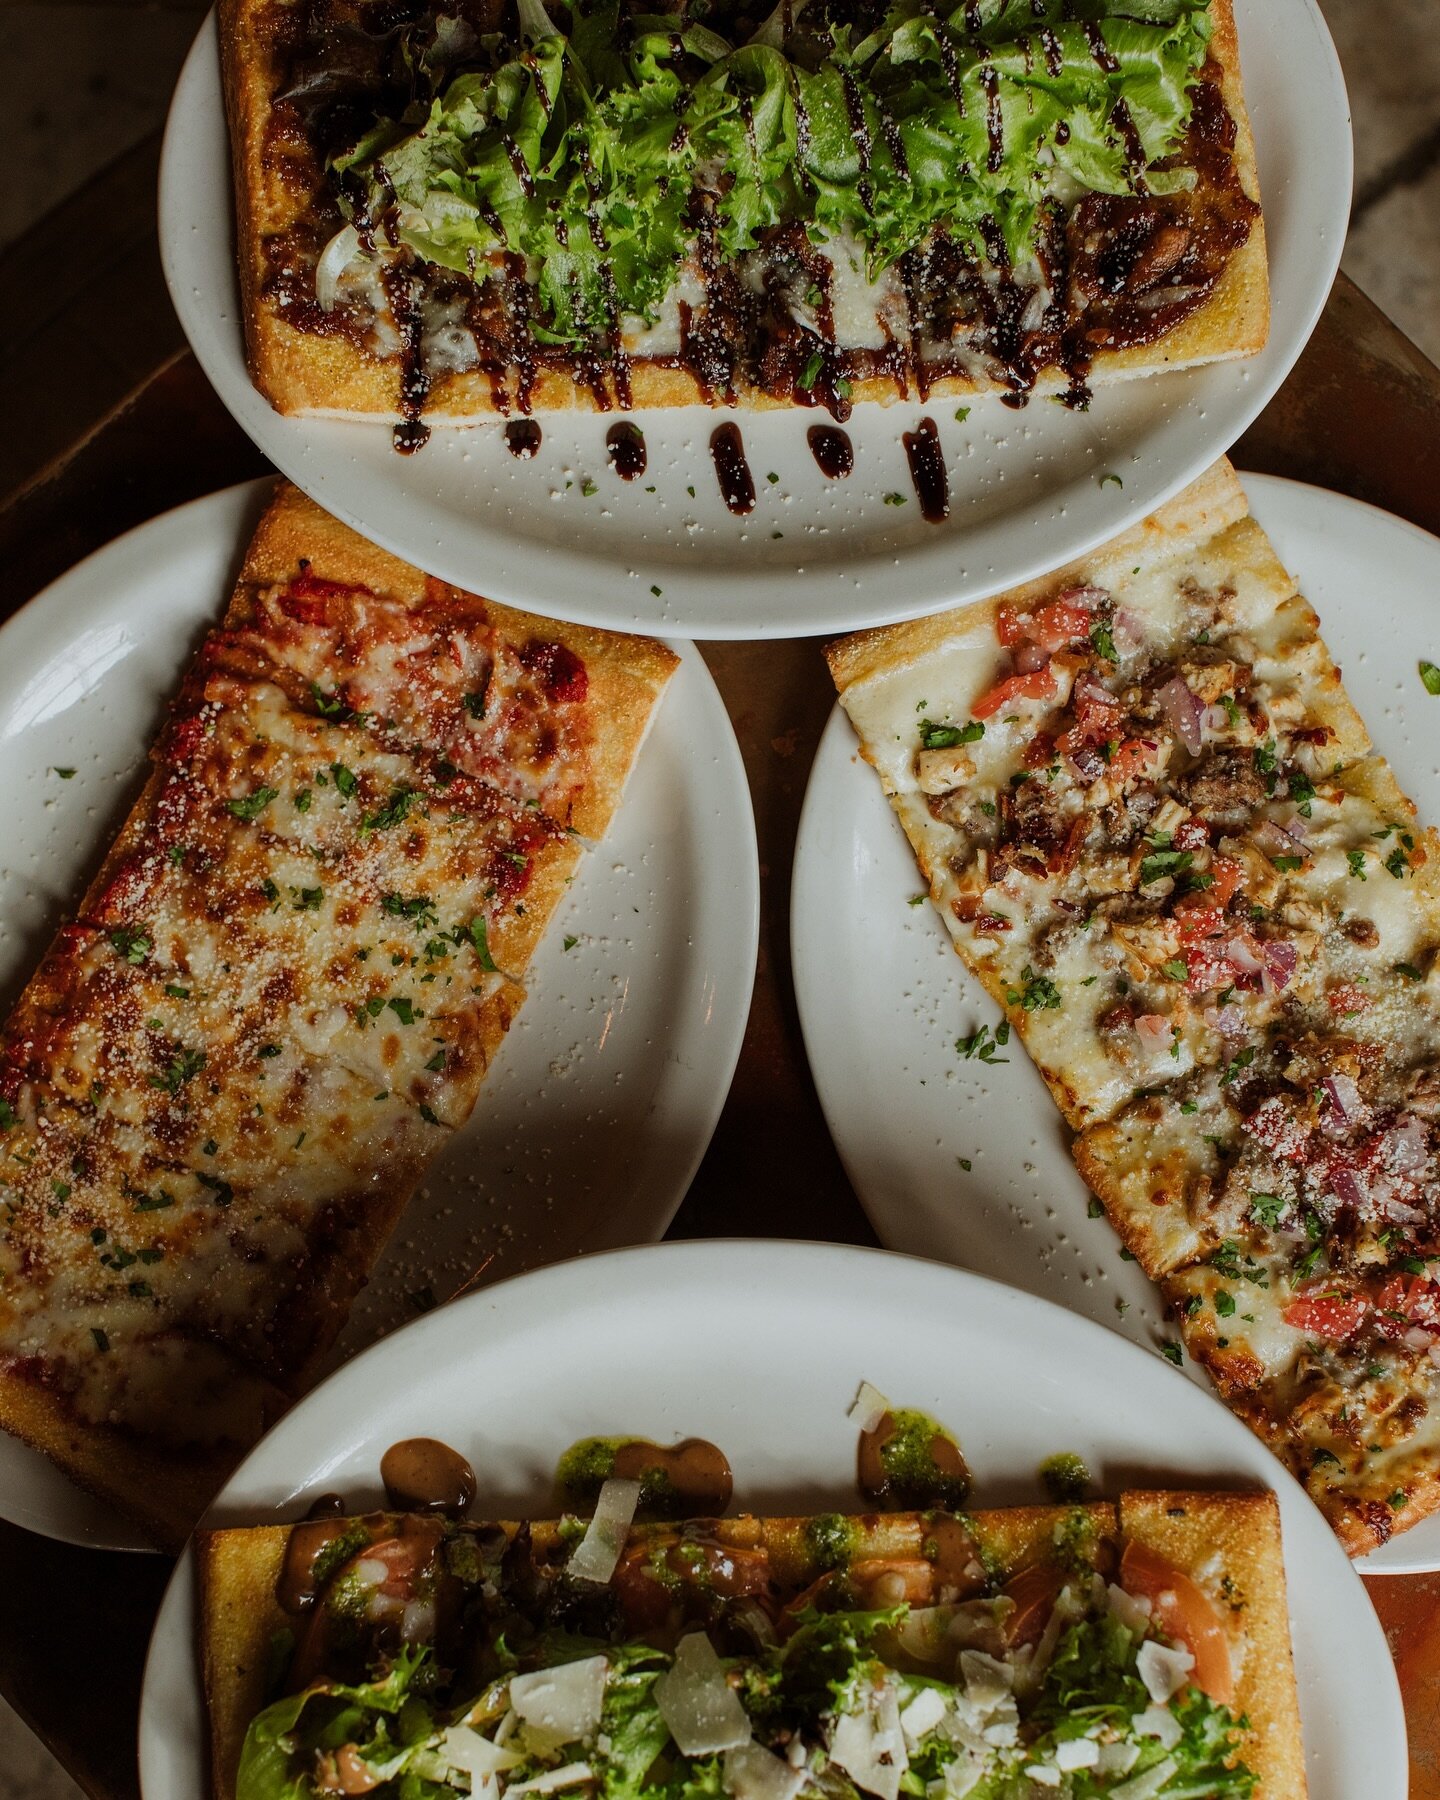 Where are my flatbread lovers at?! Come try out all 4 of these delicious flatbreads  at Bar25 😍  Featuring Classic Cheese, The Caprese, Bad Hunter, Fig &amp; Pig&hellip;.which one are you choosing??

We&rsquo;re open Wednesday through Saturday start